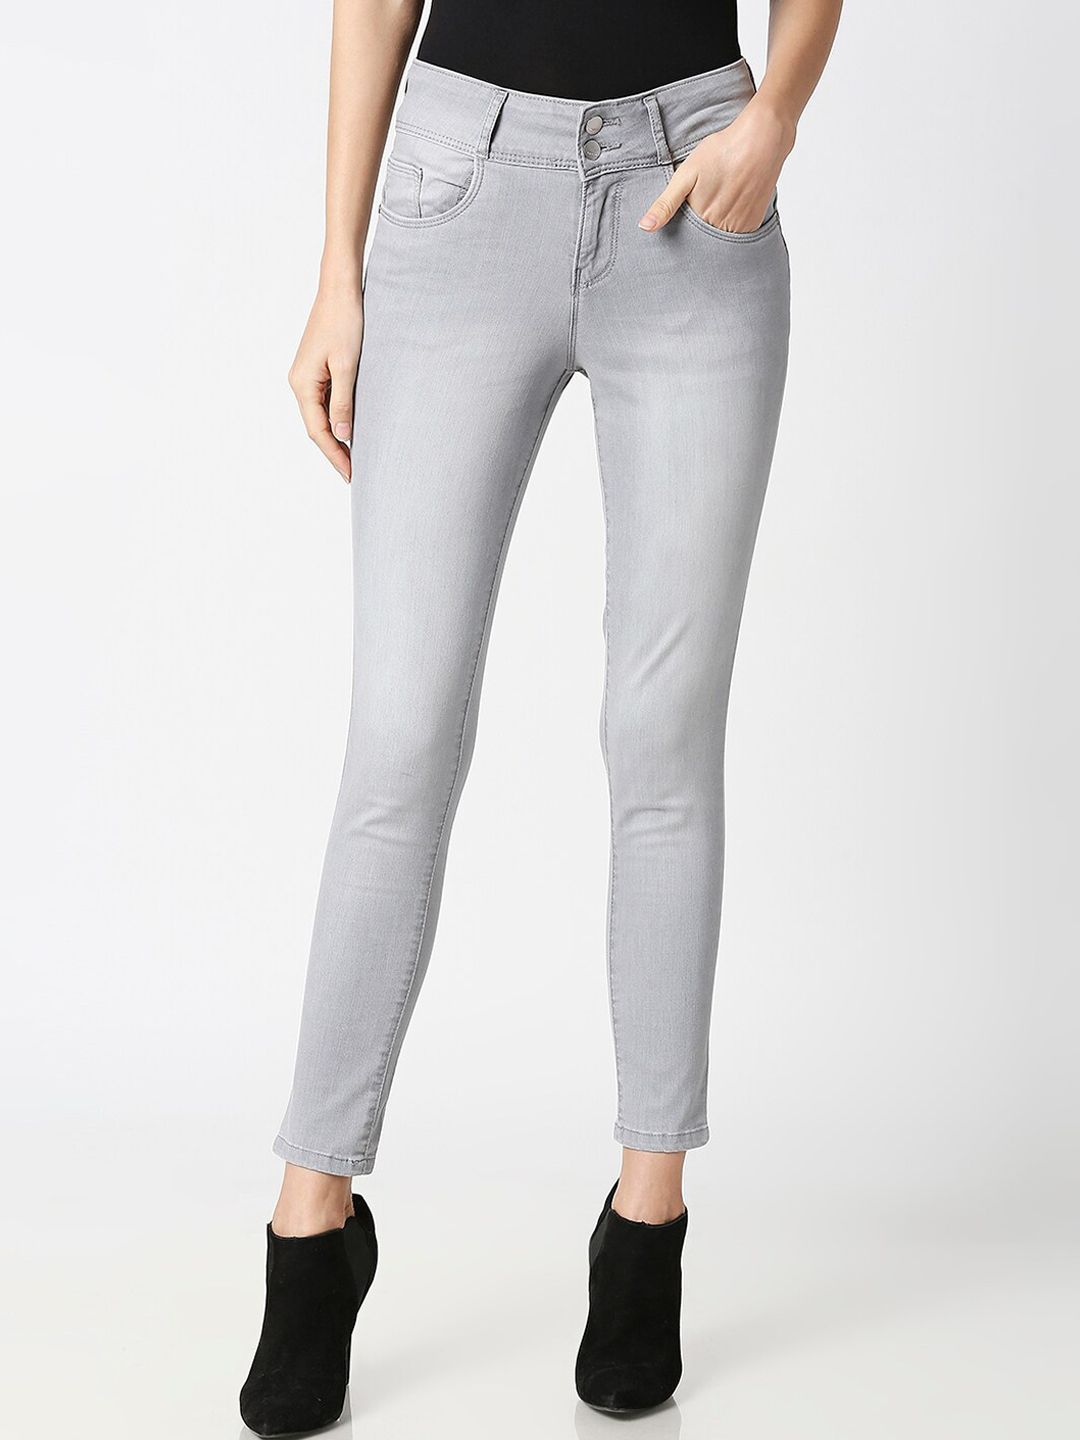 Kraus Jeans Women Grey Skinny Fit High-Rise Heavy Fade Stretchable Jeans Price in India